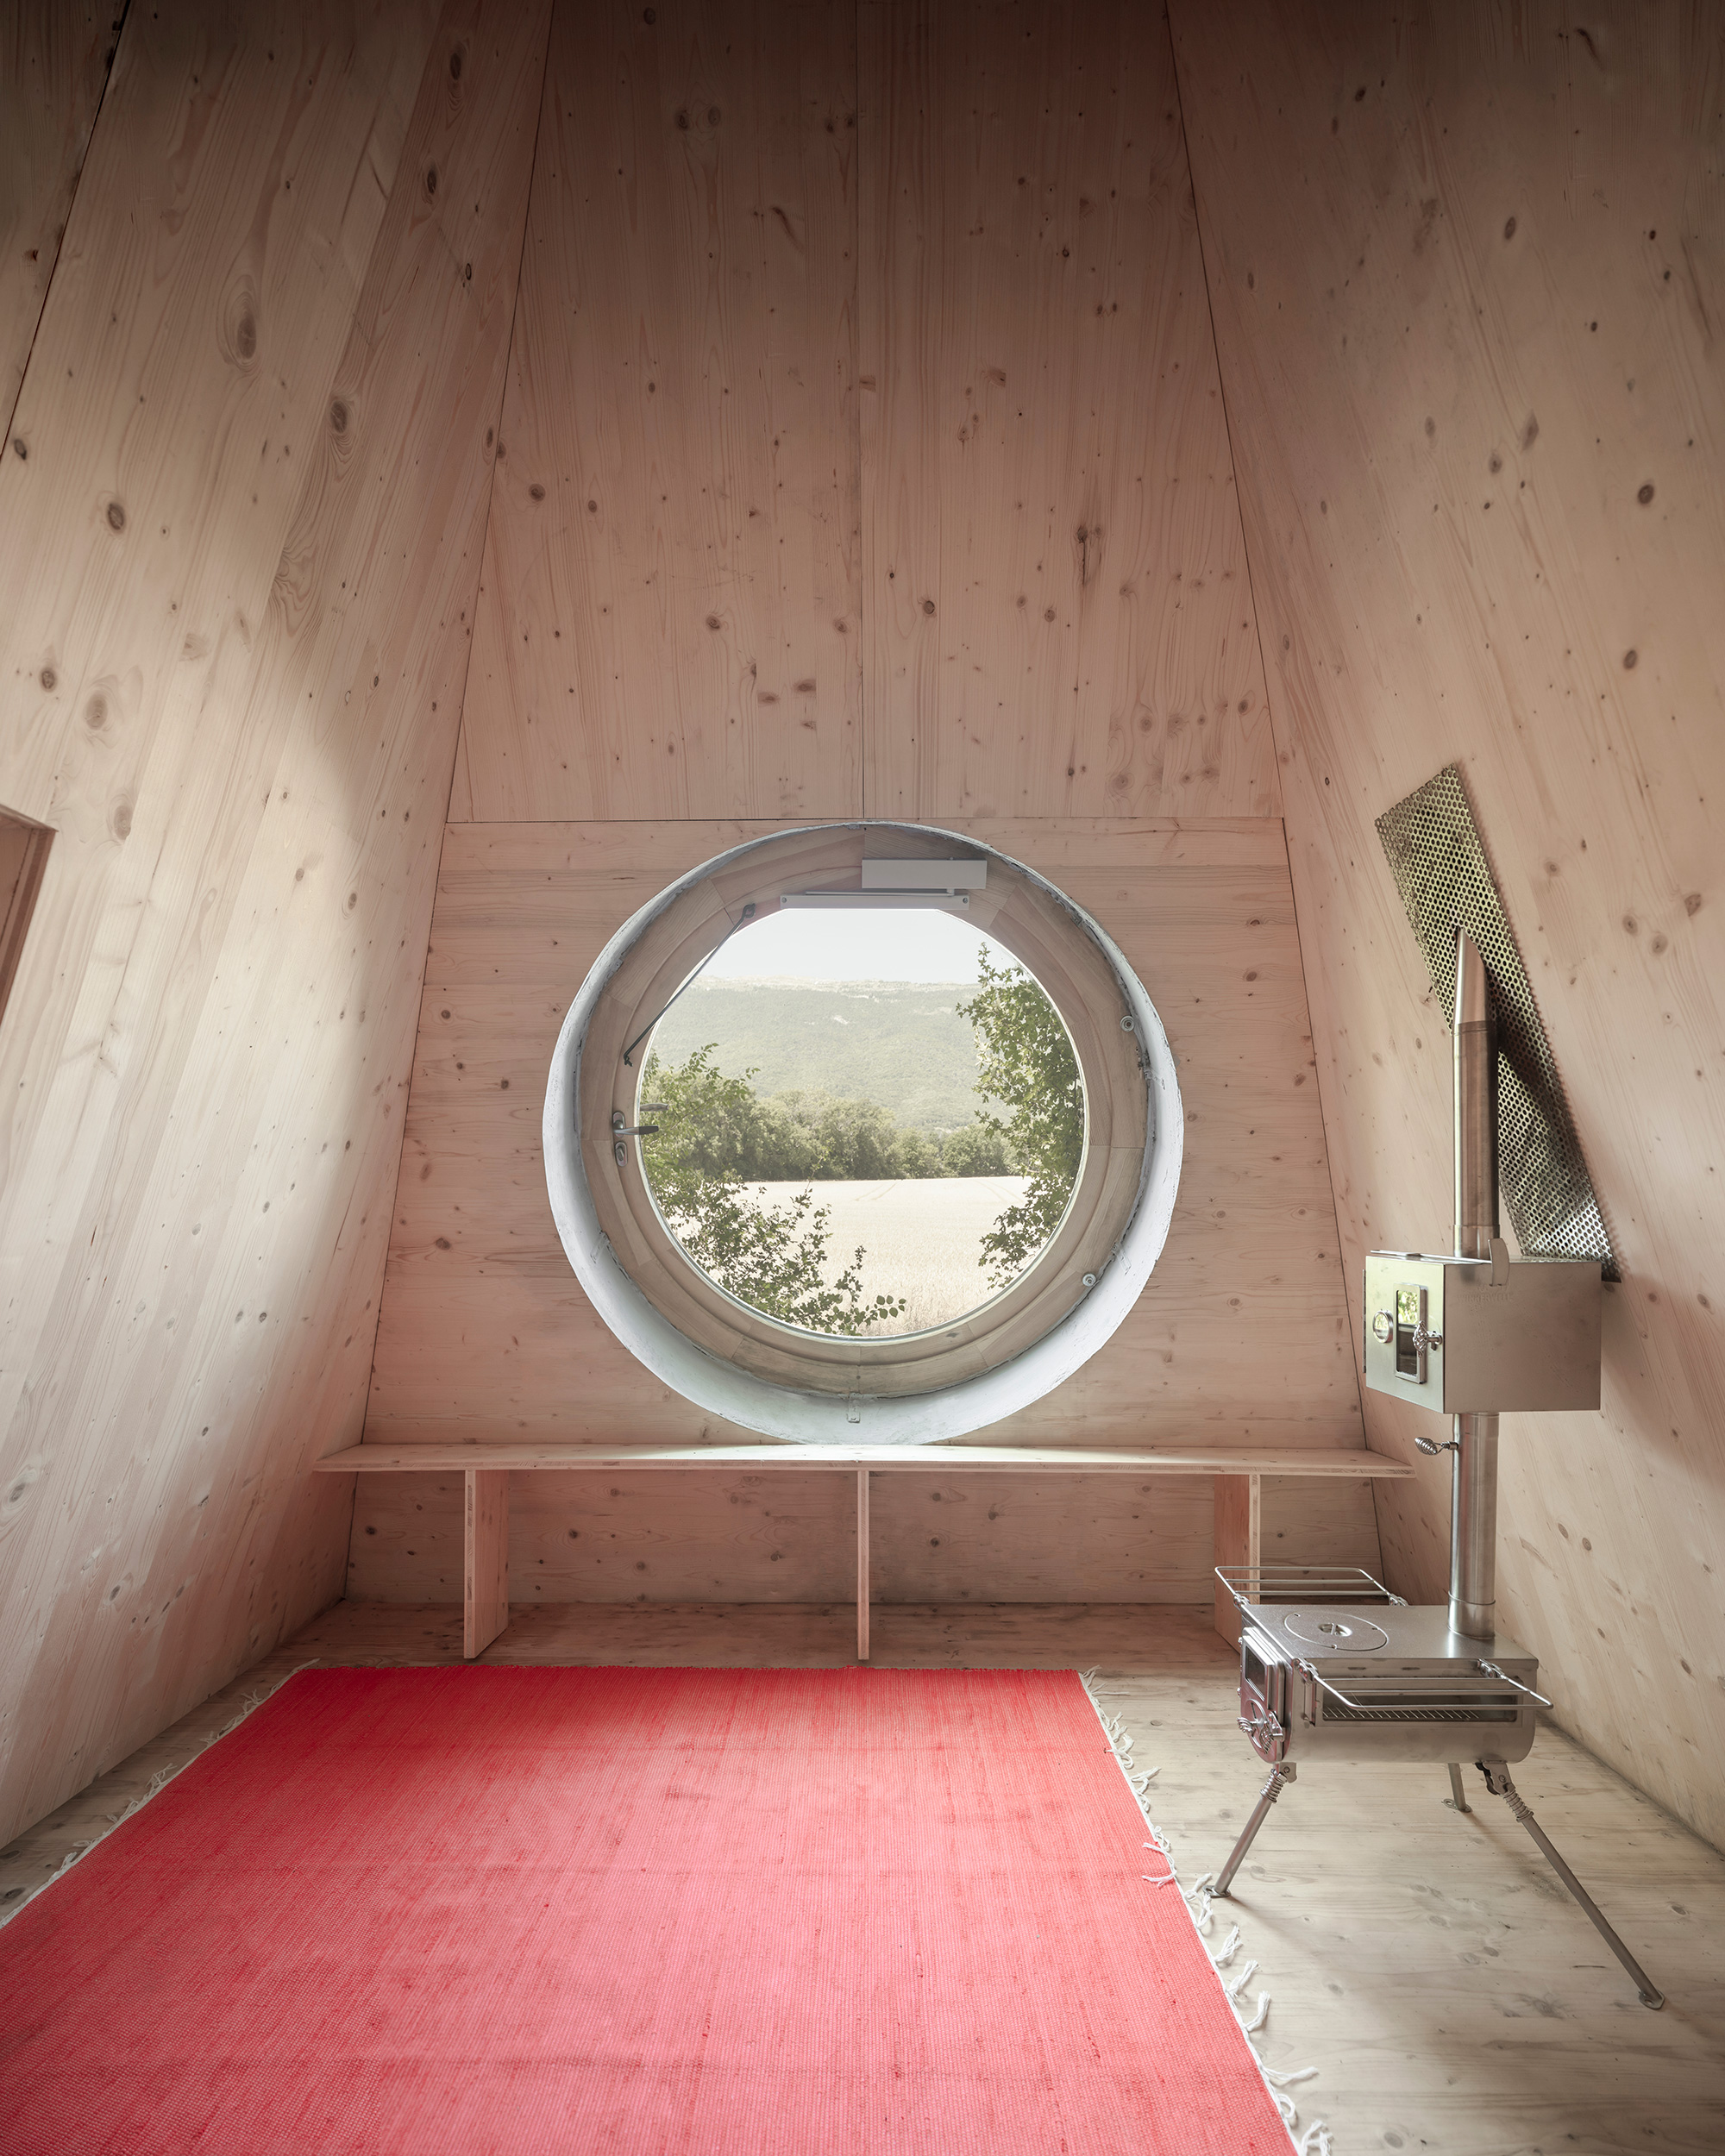 A tiny shelter designed to blend into nature with a boulder-like exterior.